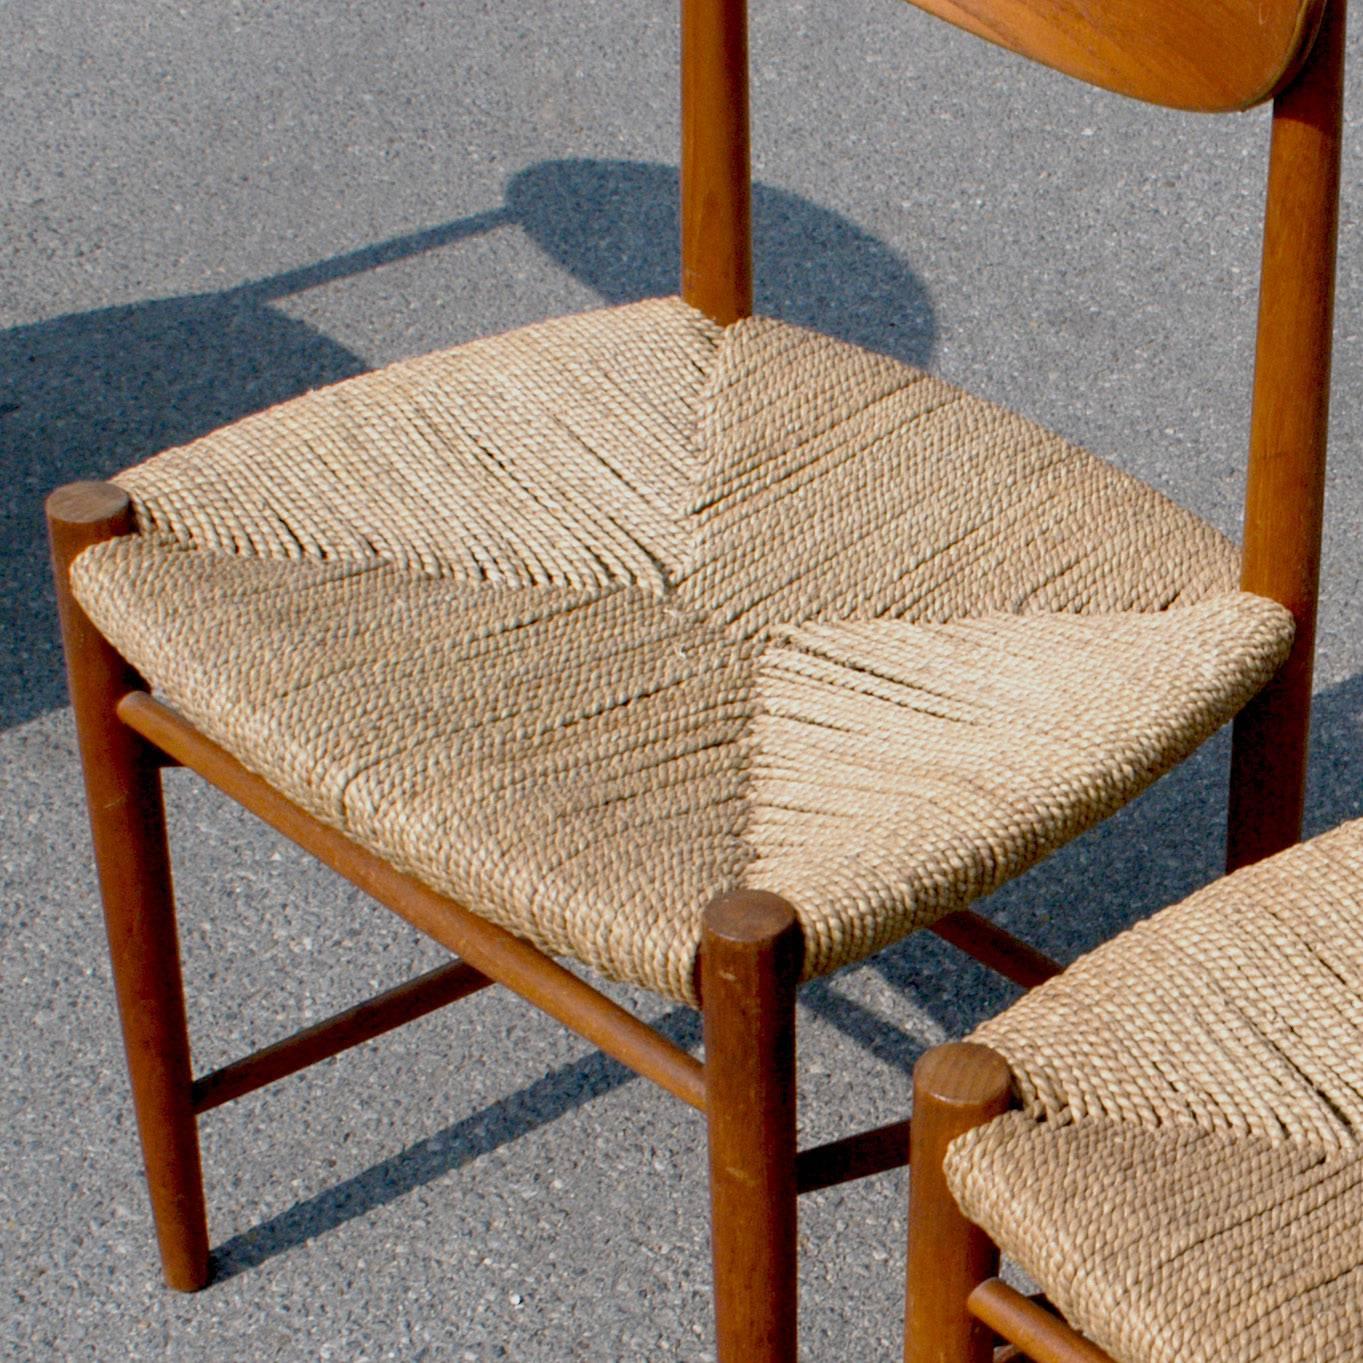 Iconic excellent Scandinavian modern teak chairs with original cane seats, manufactured by Soborg Mobler.
   